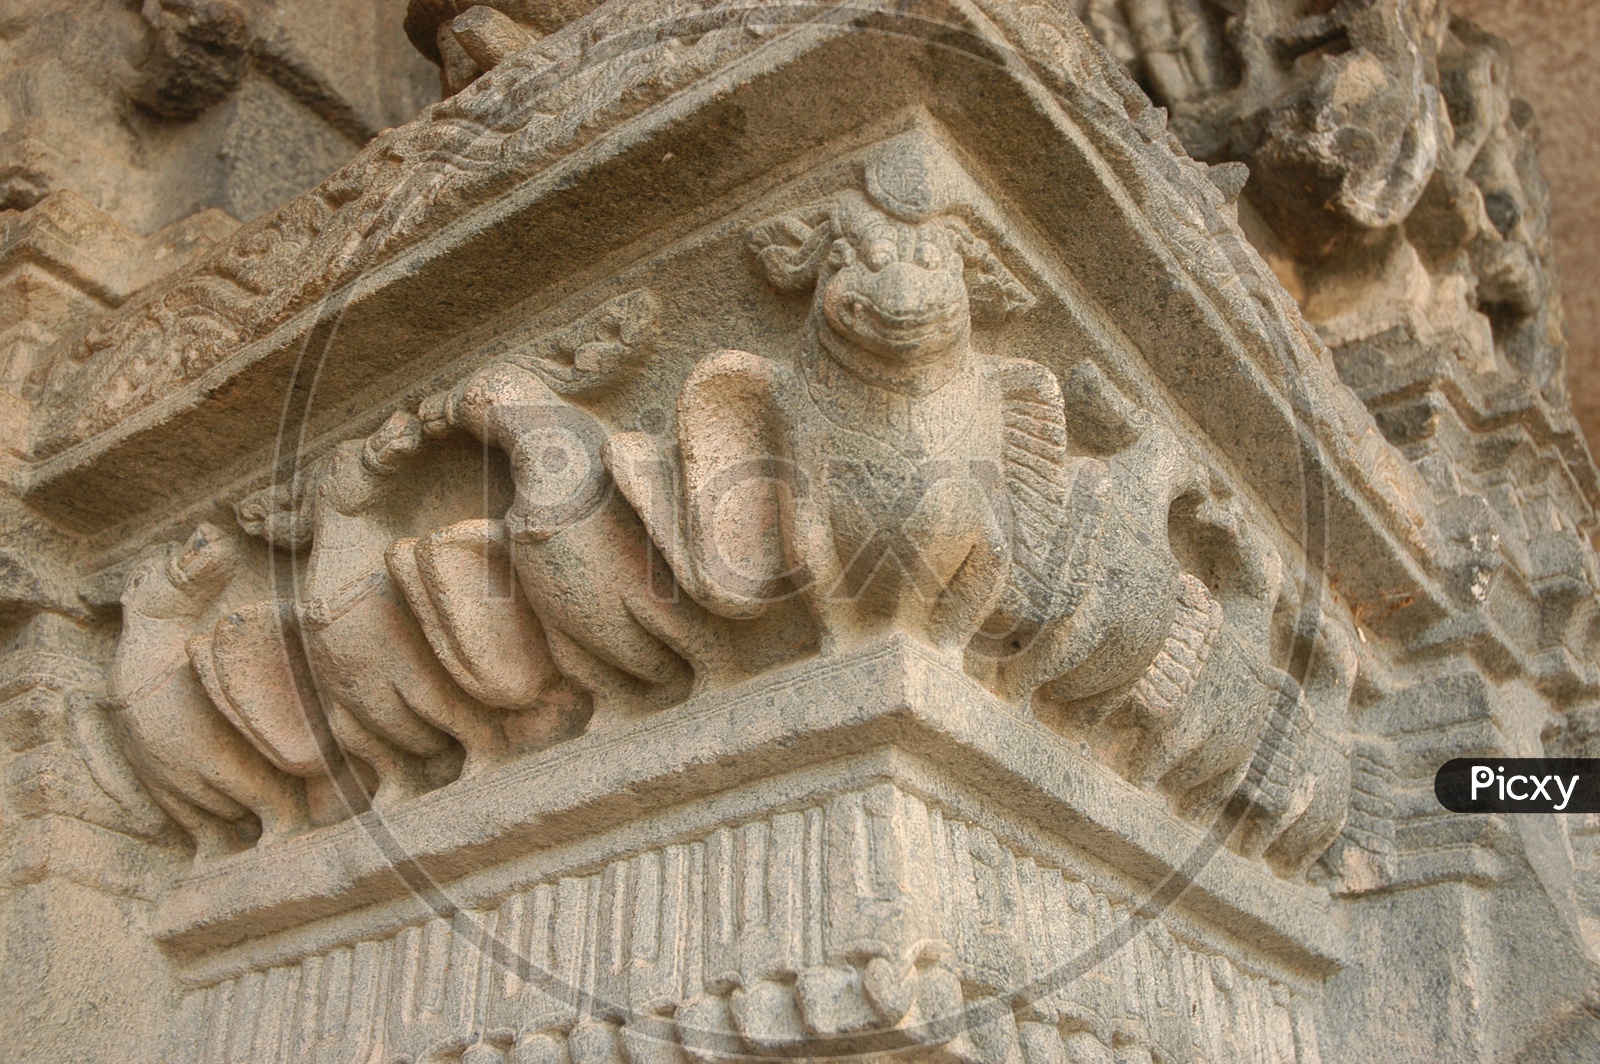 Stone carvings at an Ancient temple